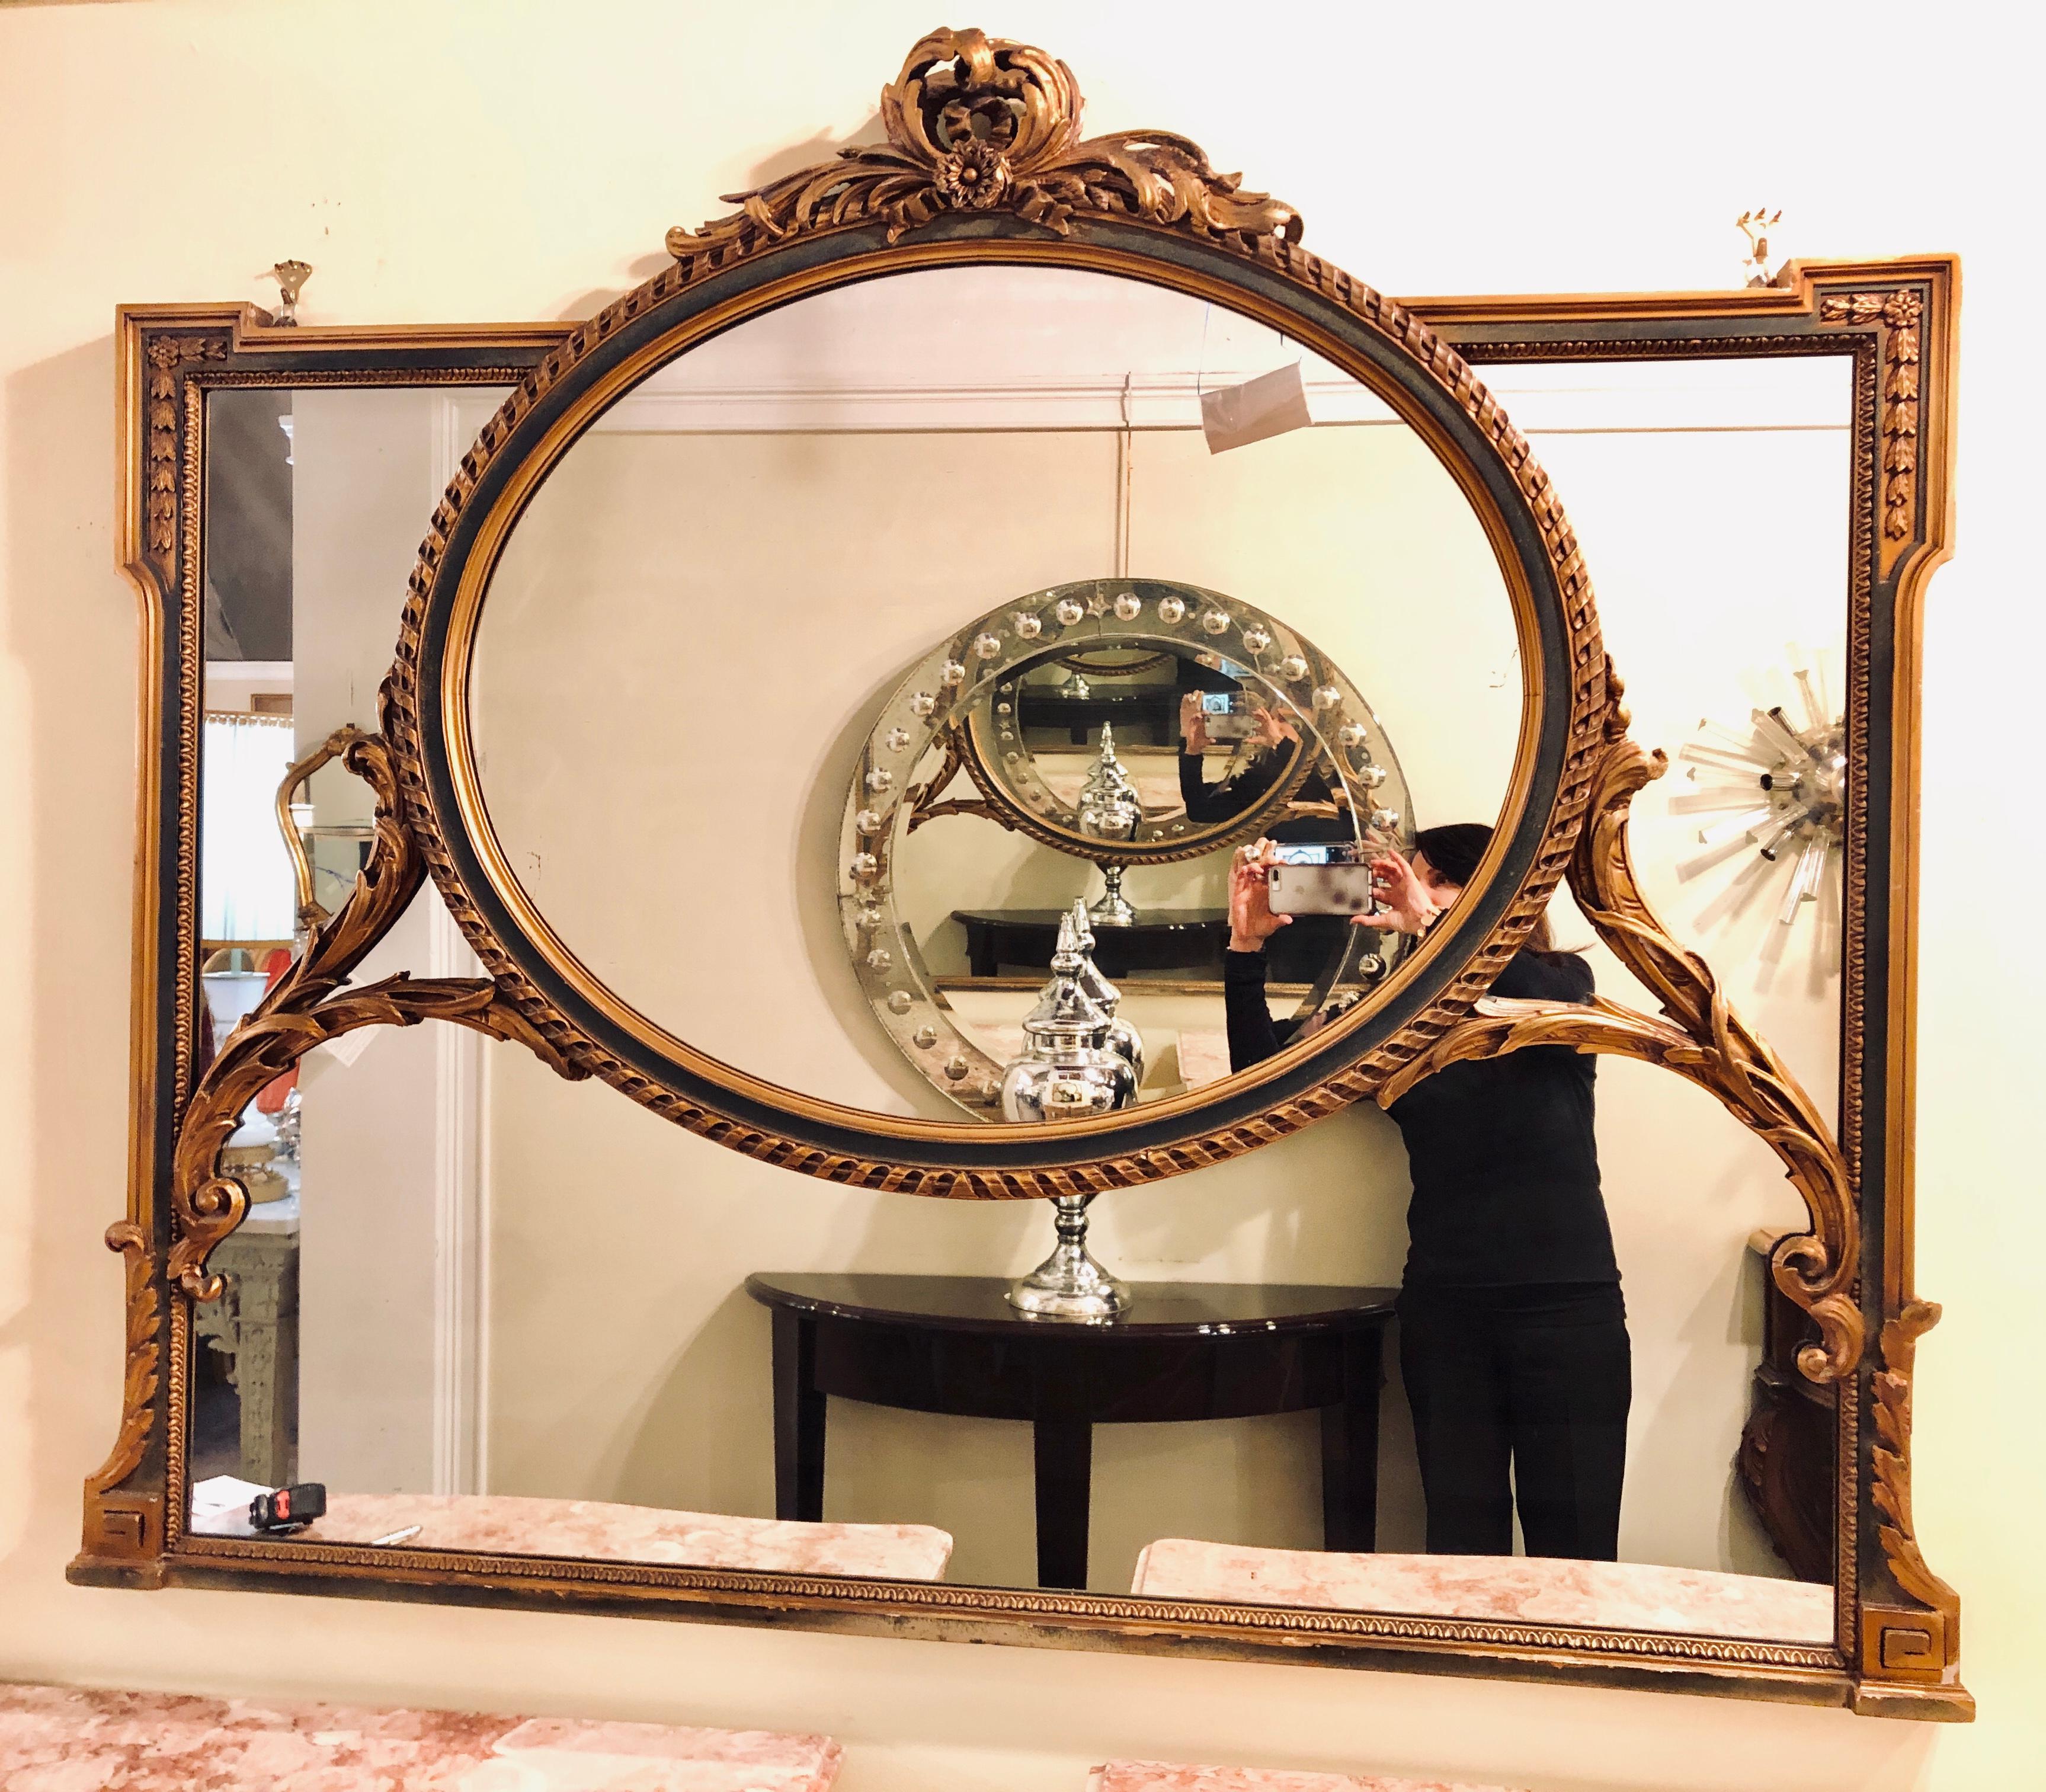 A finely carved Hollywood Regency or Adams style over the mantel (fireplace) or wall mirror. This stunning and one of a kind over the mantel (fireplace) or wall / console mirror is simply magnificent. The gilt wooden and greenish paint decorated